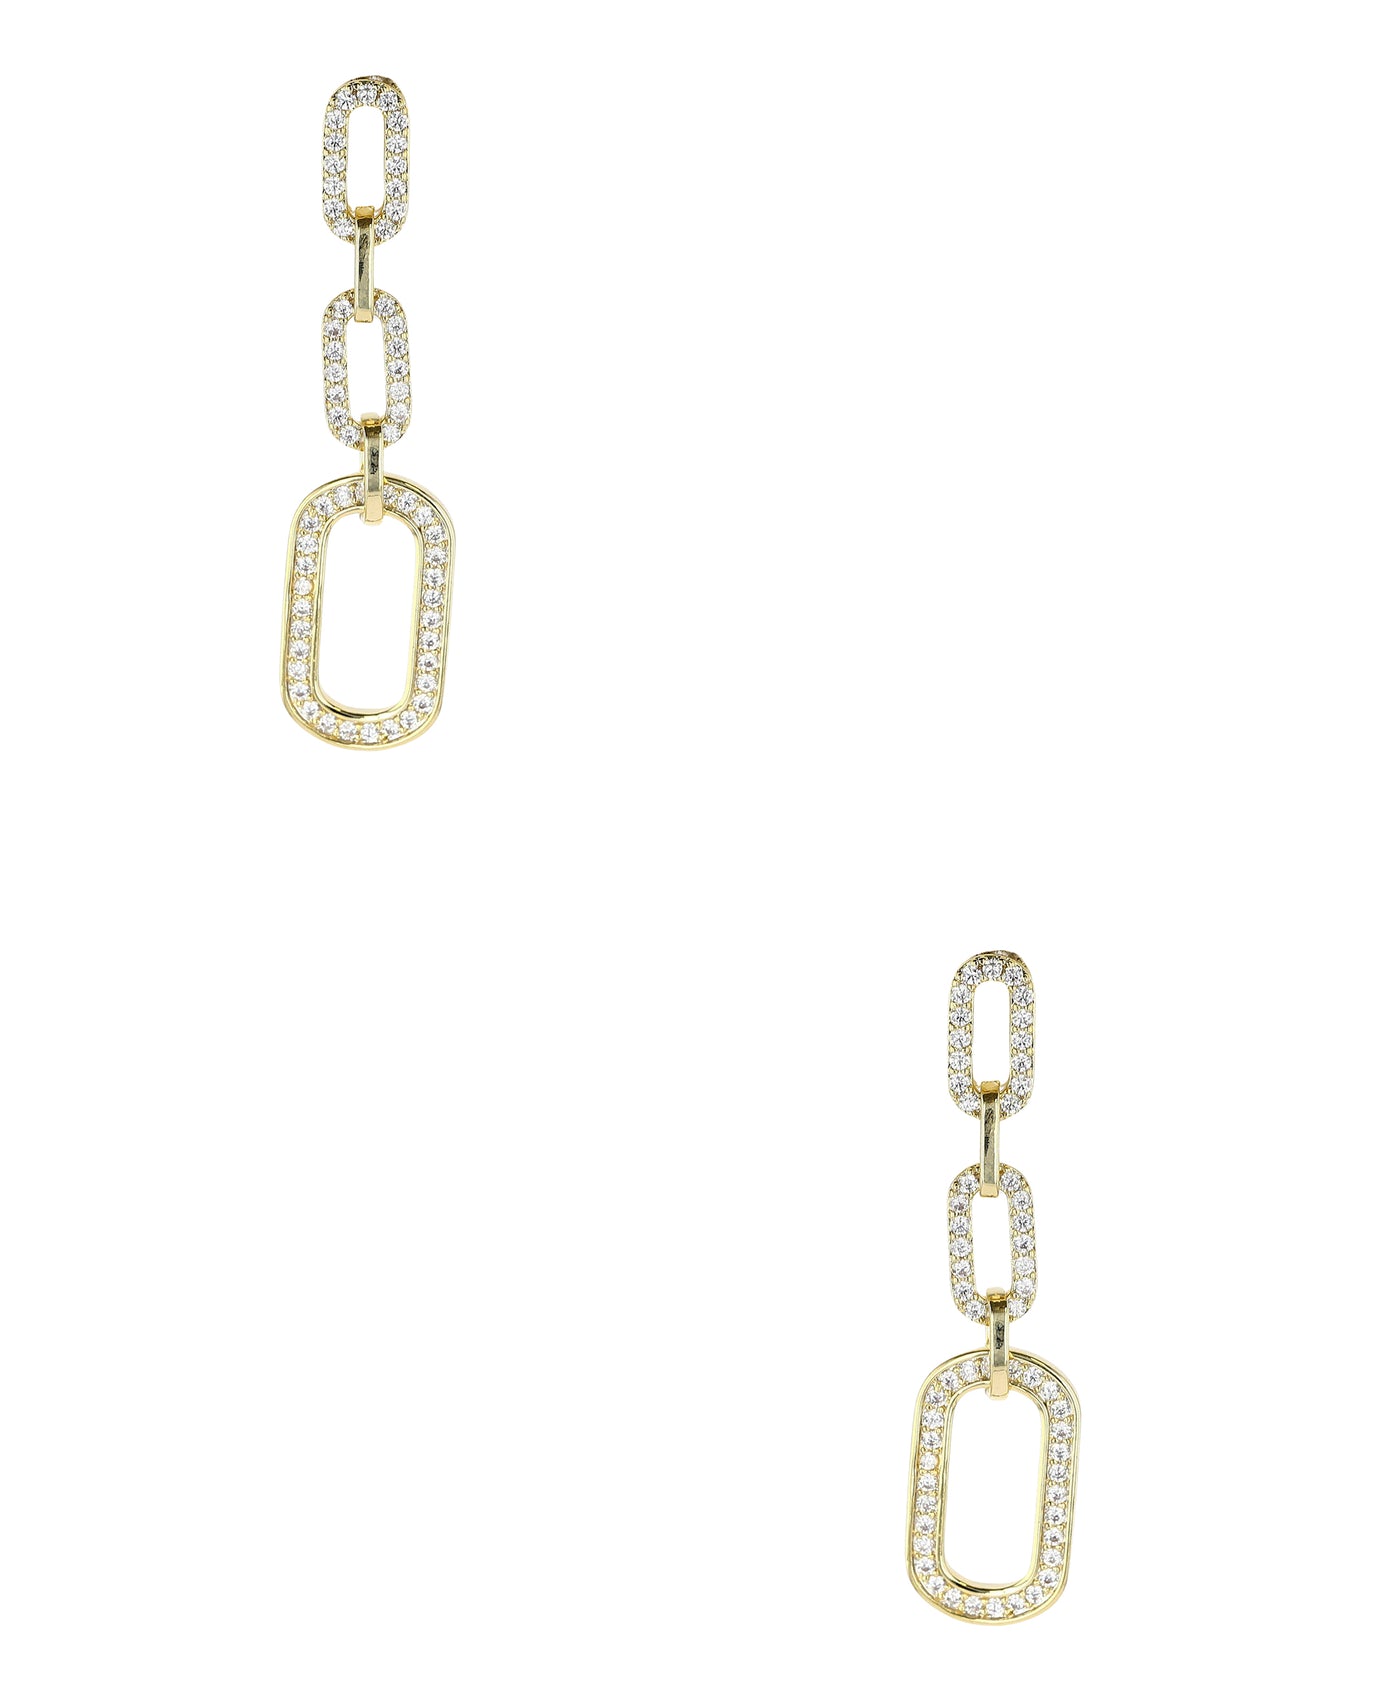 Chain Drop Earrings w/ CZ Accent image 1